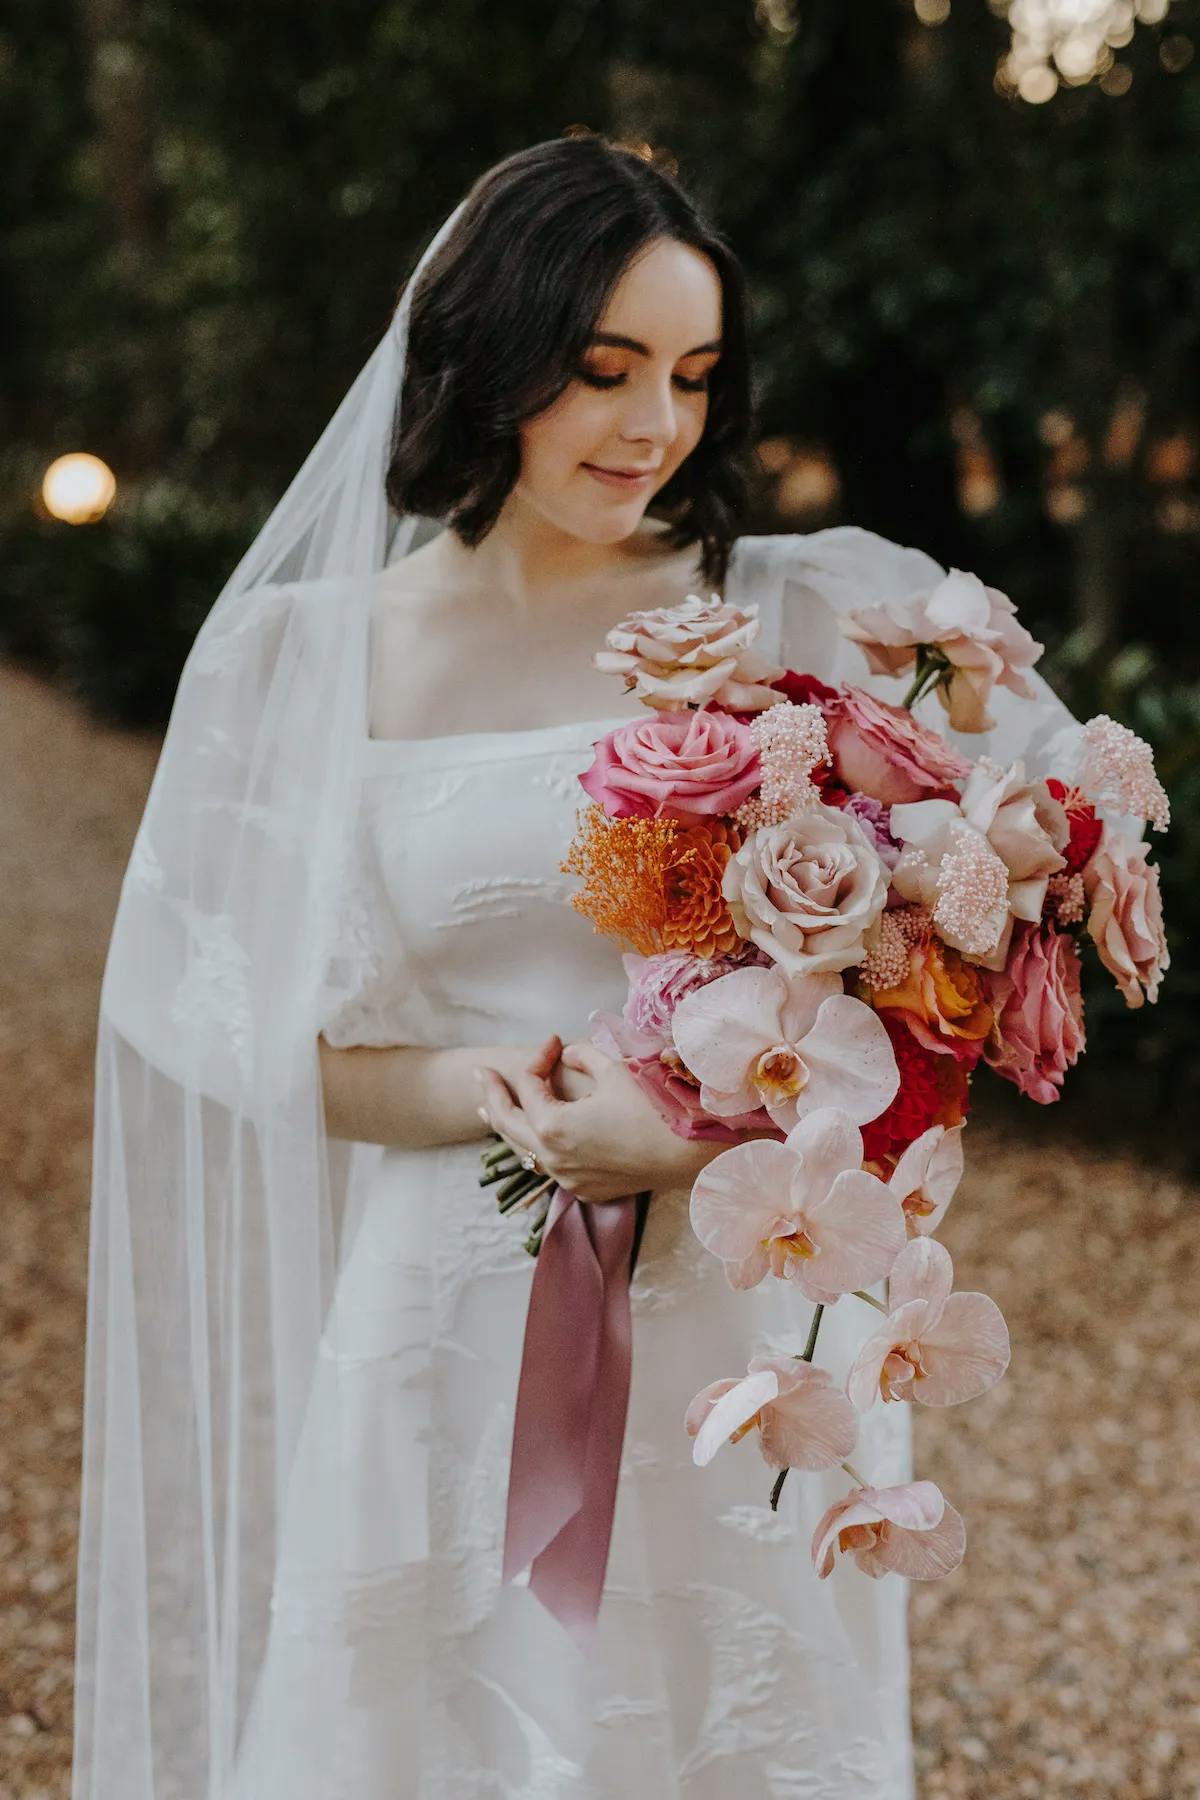 A bride with dark hair looks down while holding a cascading bouquet of pink, peach, and orange flowers. She is wearing a white wedding dress with a sheer veil and stands on a pebble path with greenery in the background, illuminated by soft lighting.